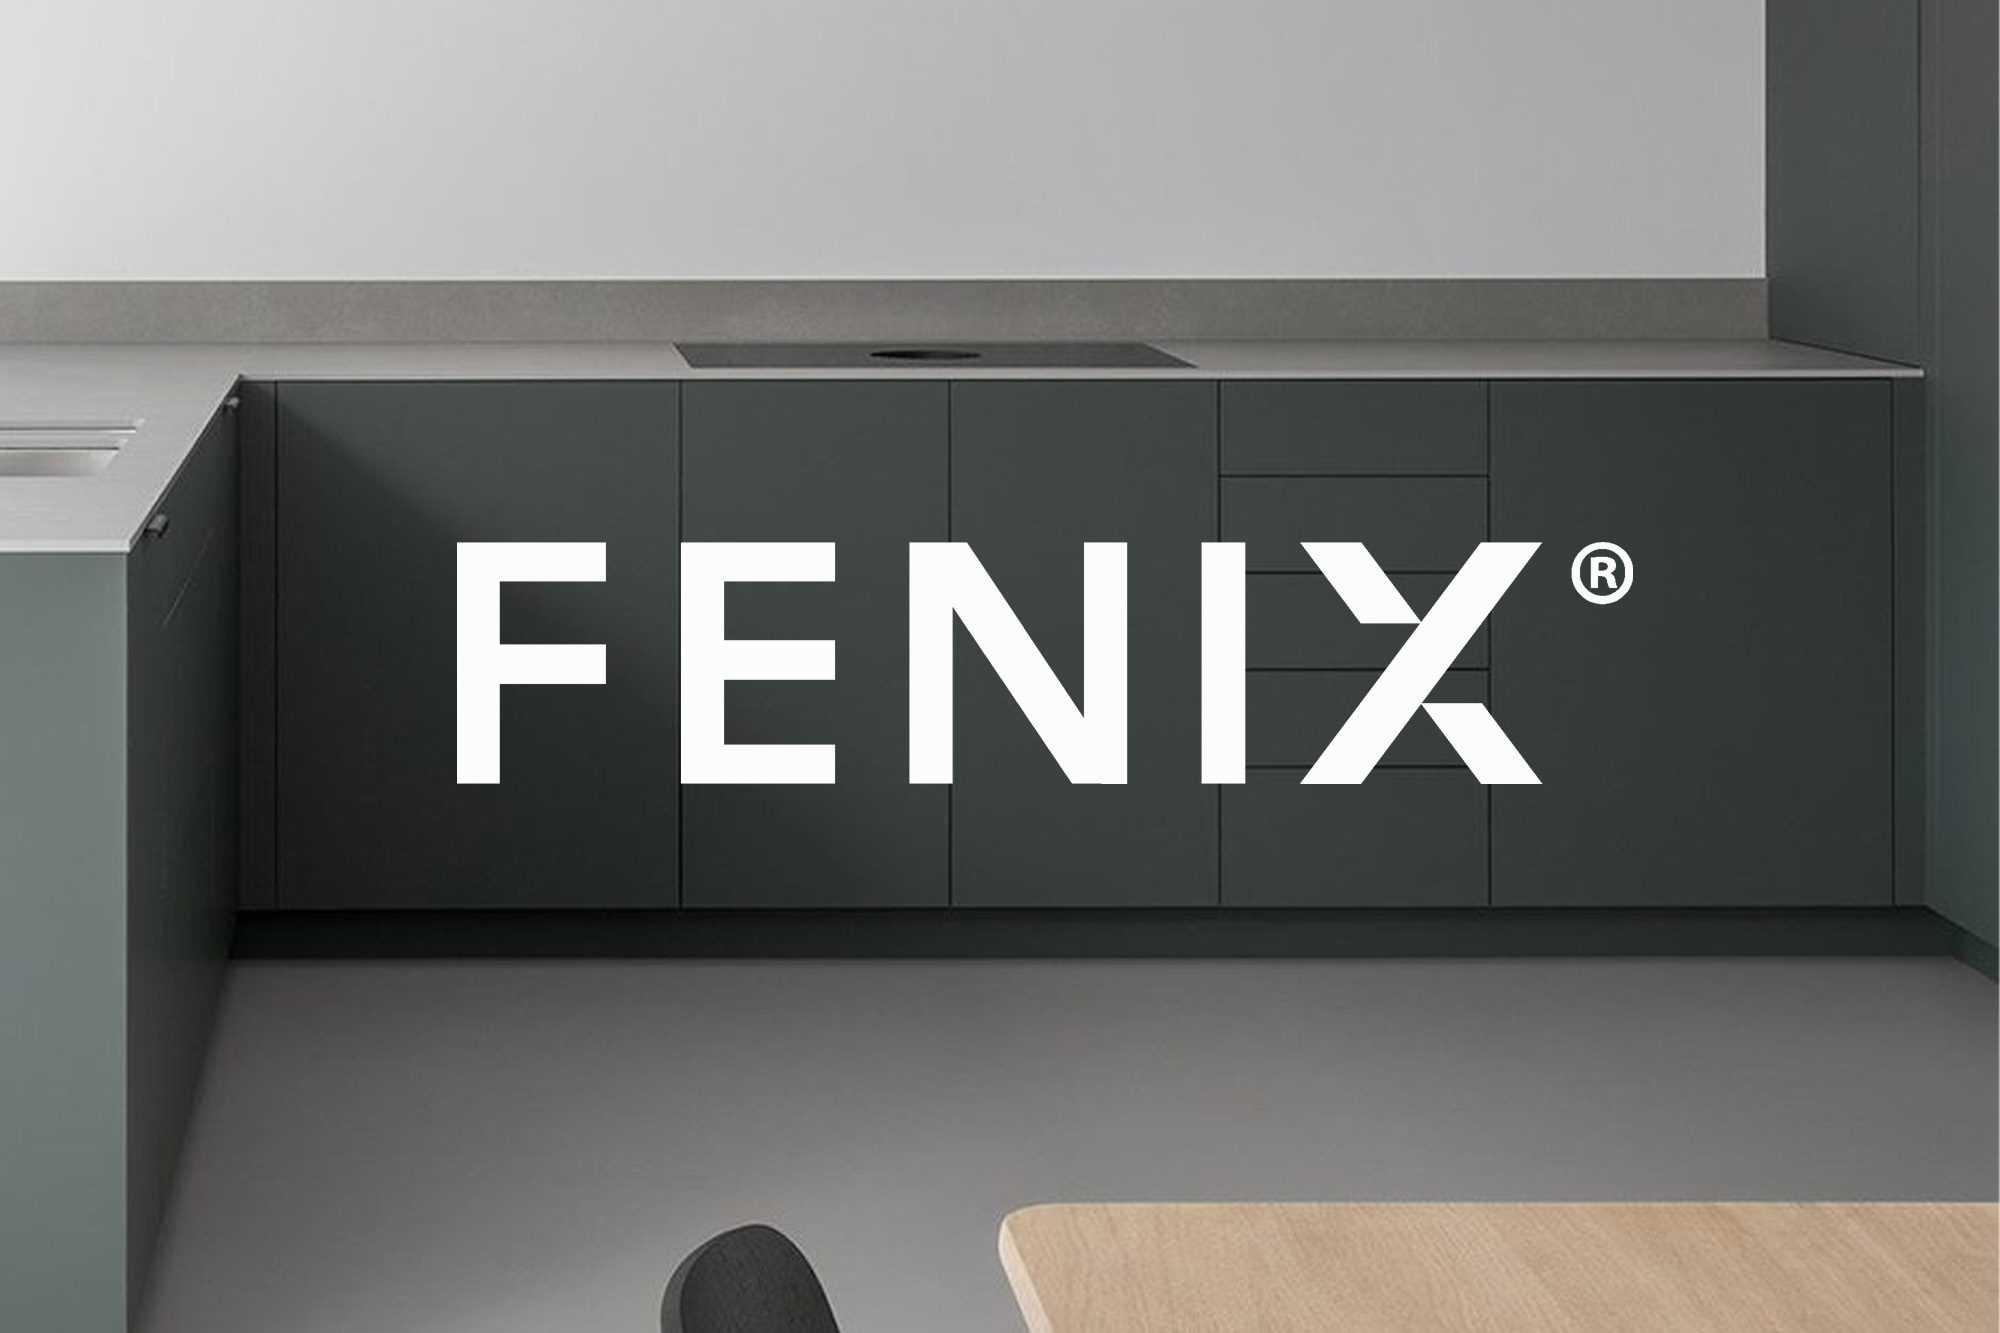 The FENIX® Innovative Materials Logo over an image of HUSK's Project K Kitchen.